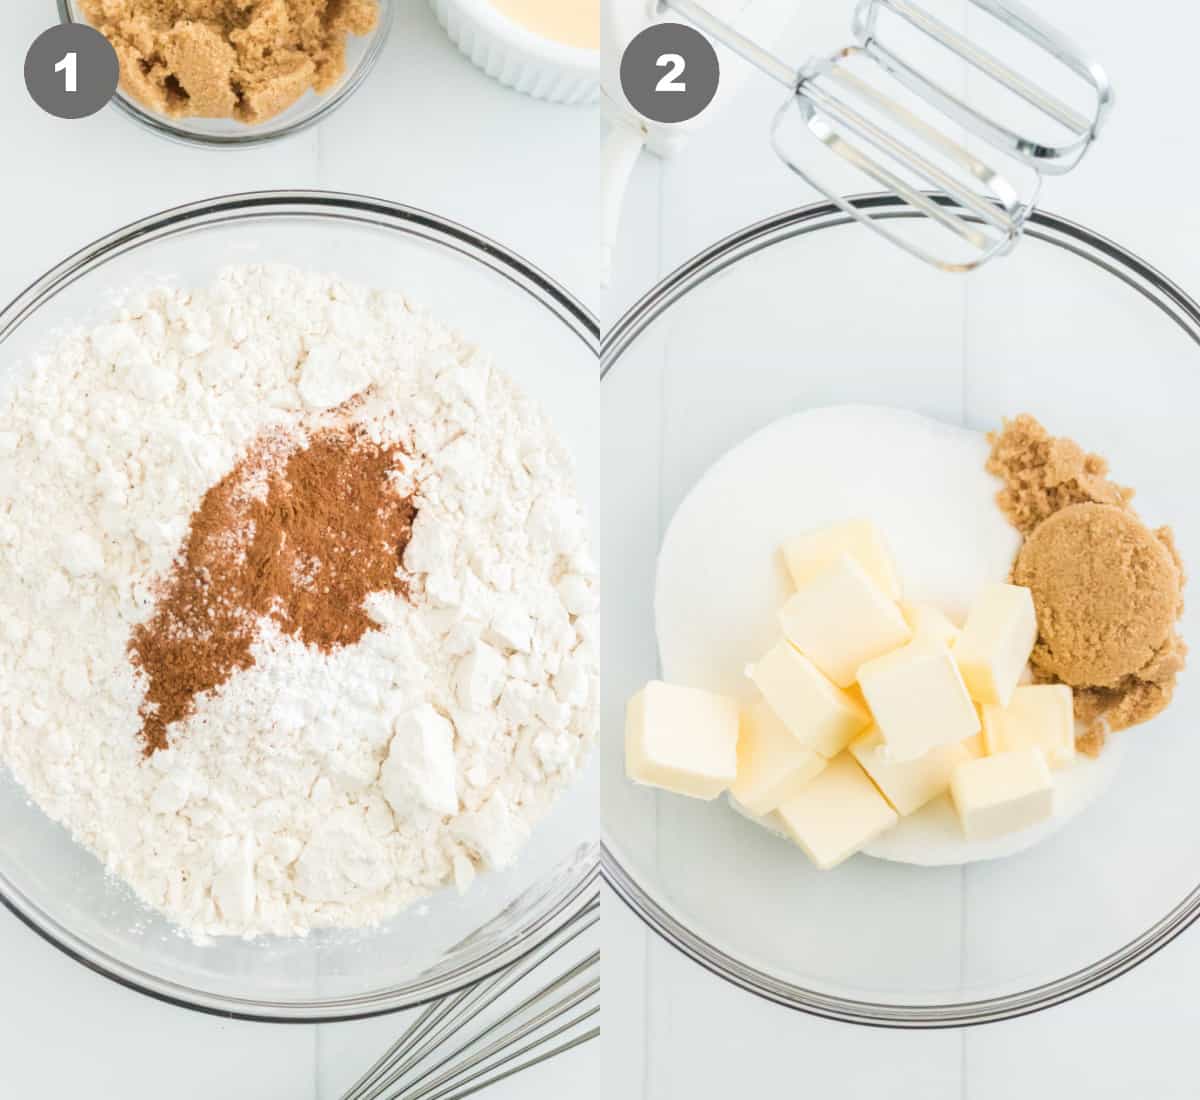 Dry ingredients in a bowl and the wet ingredients in a bowl.